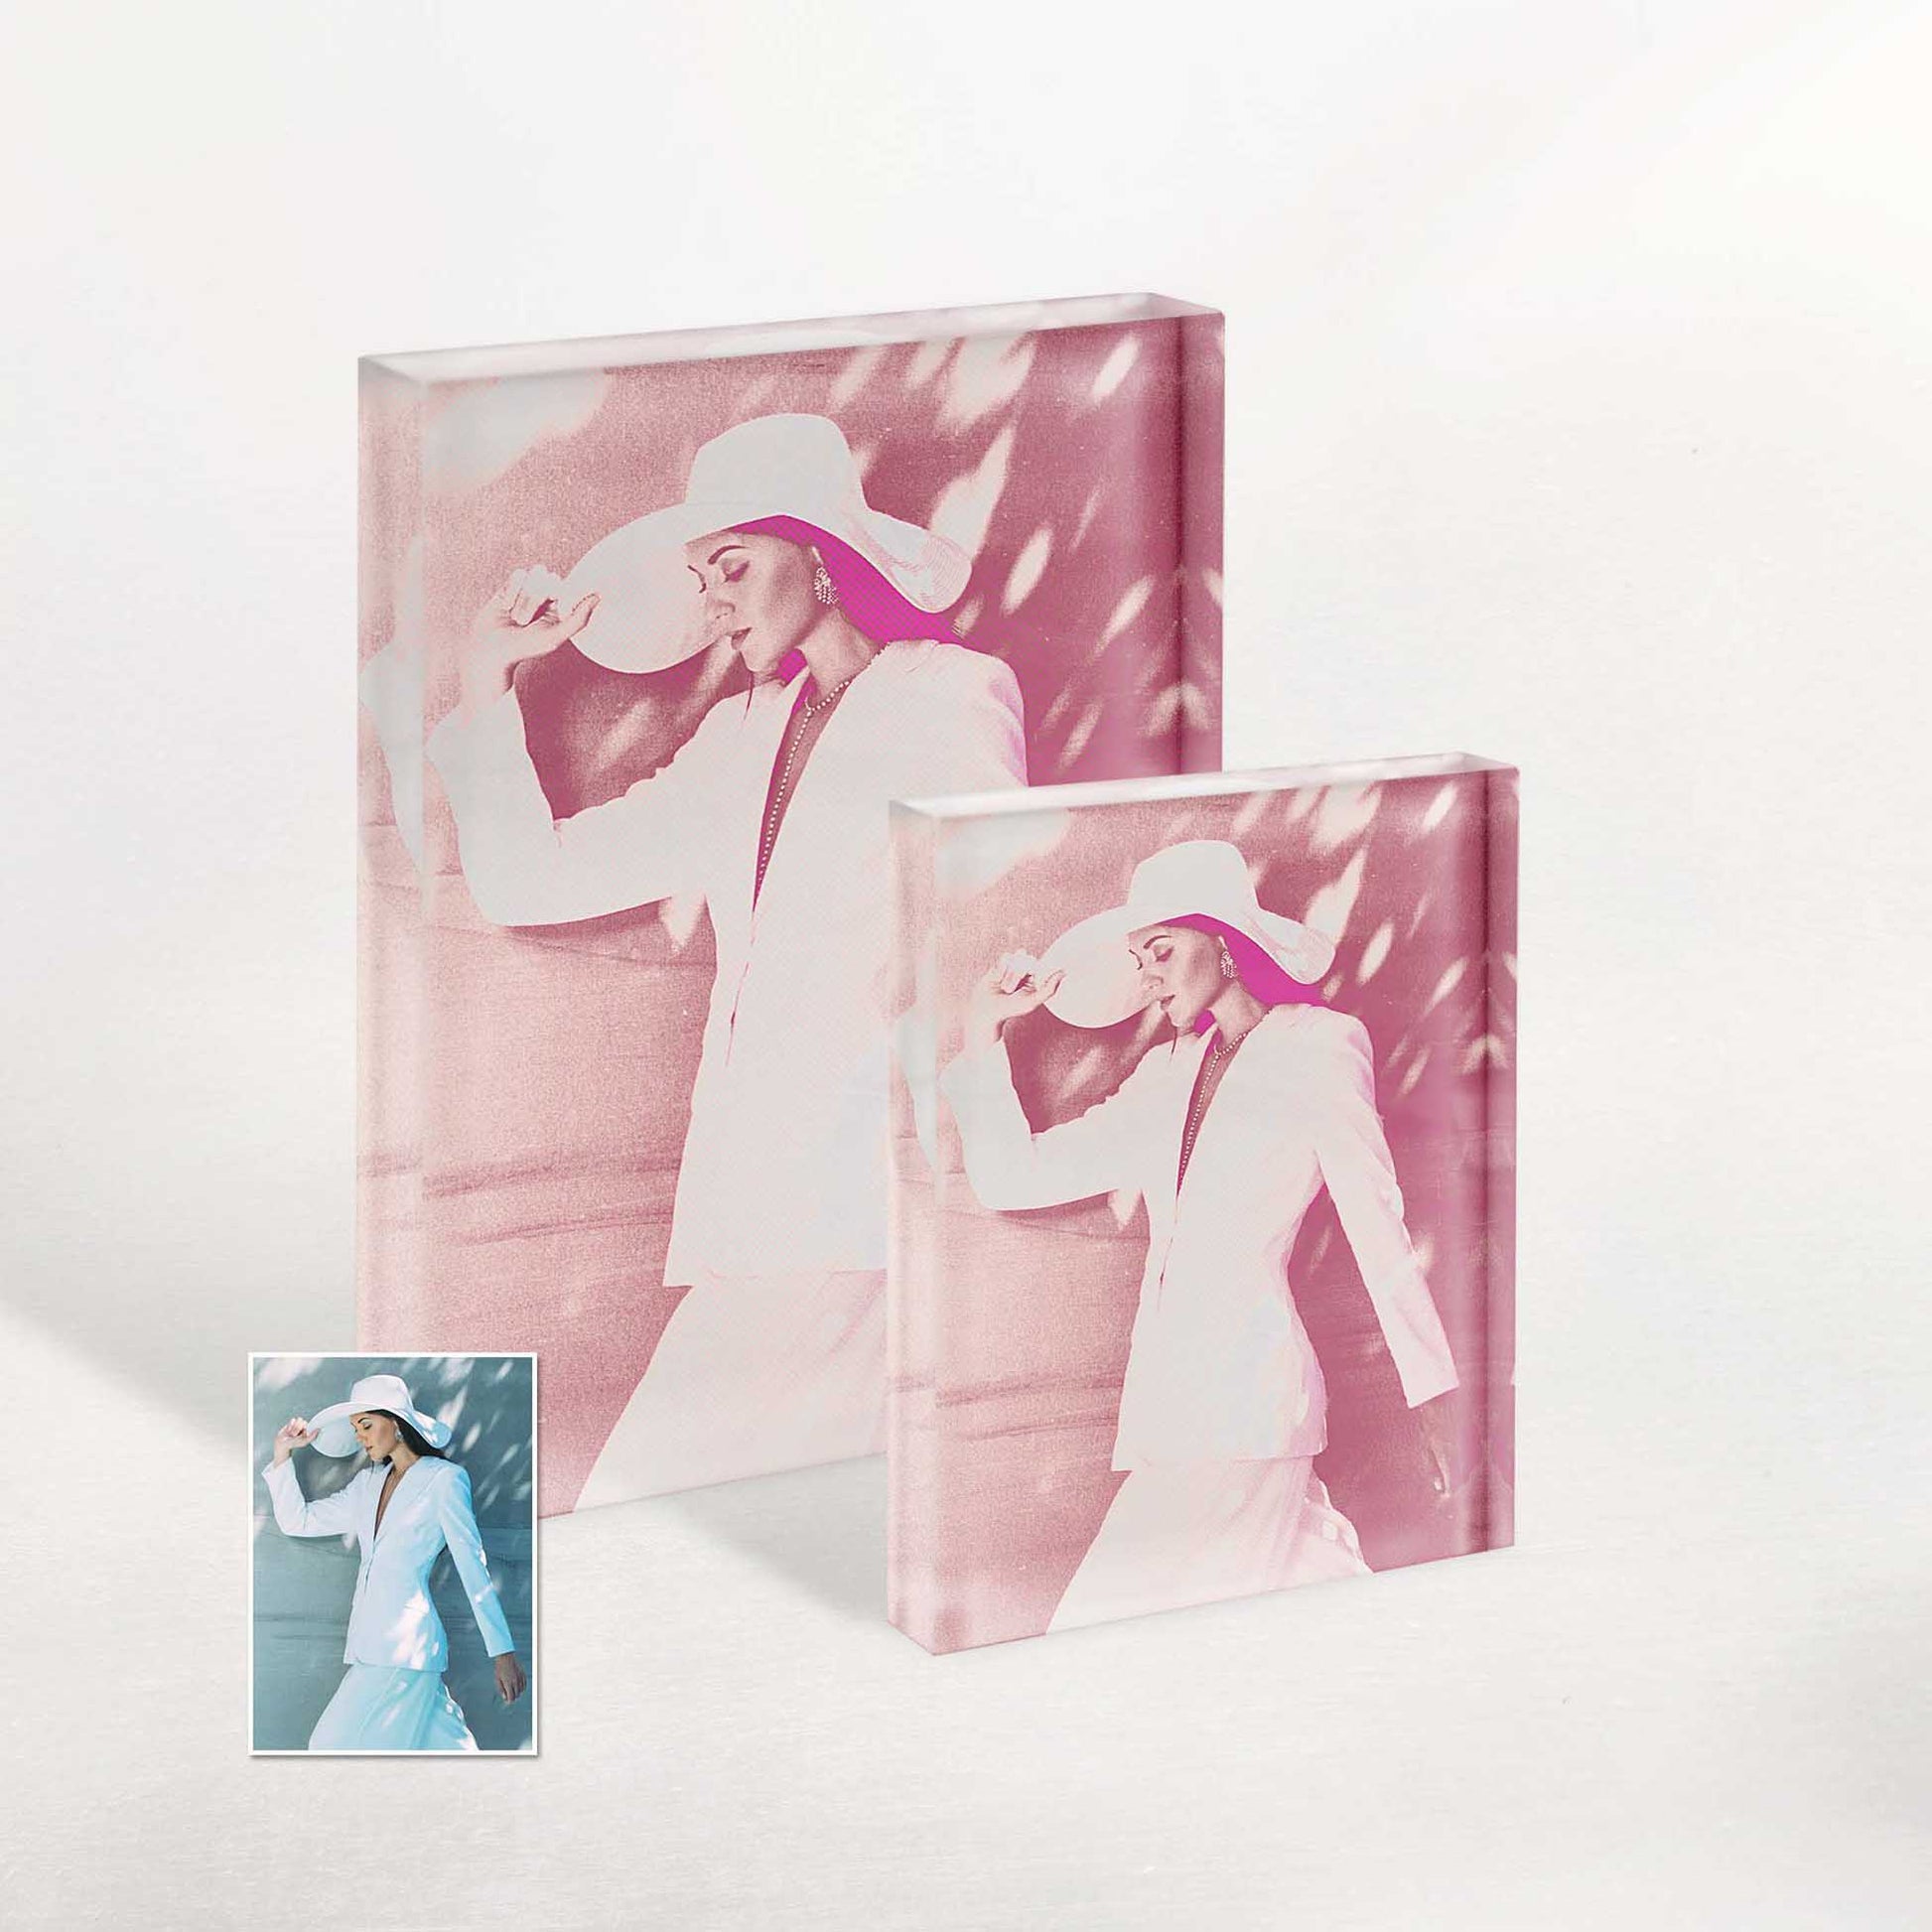 Personalised Pink Pop Halftone Acrylic Block Photo: A burst of vibrant happiness for your home decor. The exciting and chic design adds an elegant charm to your space, while the vivid colors and halftone effect 